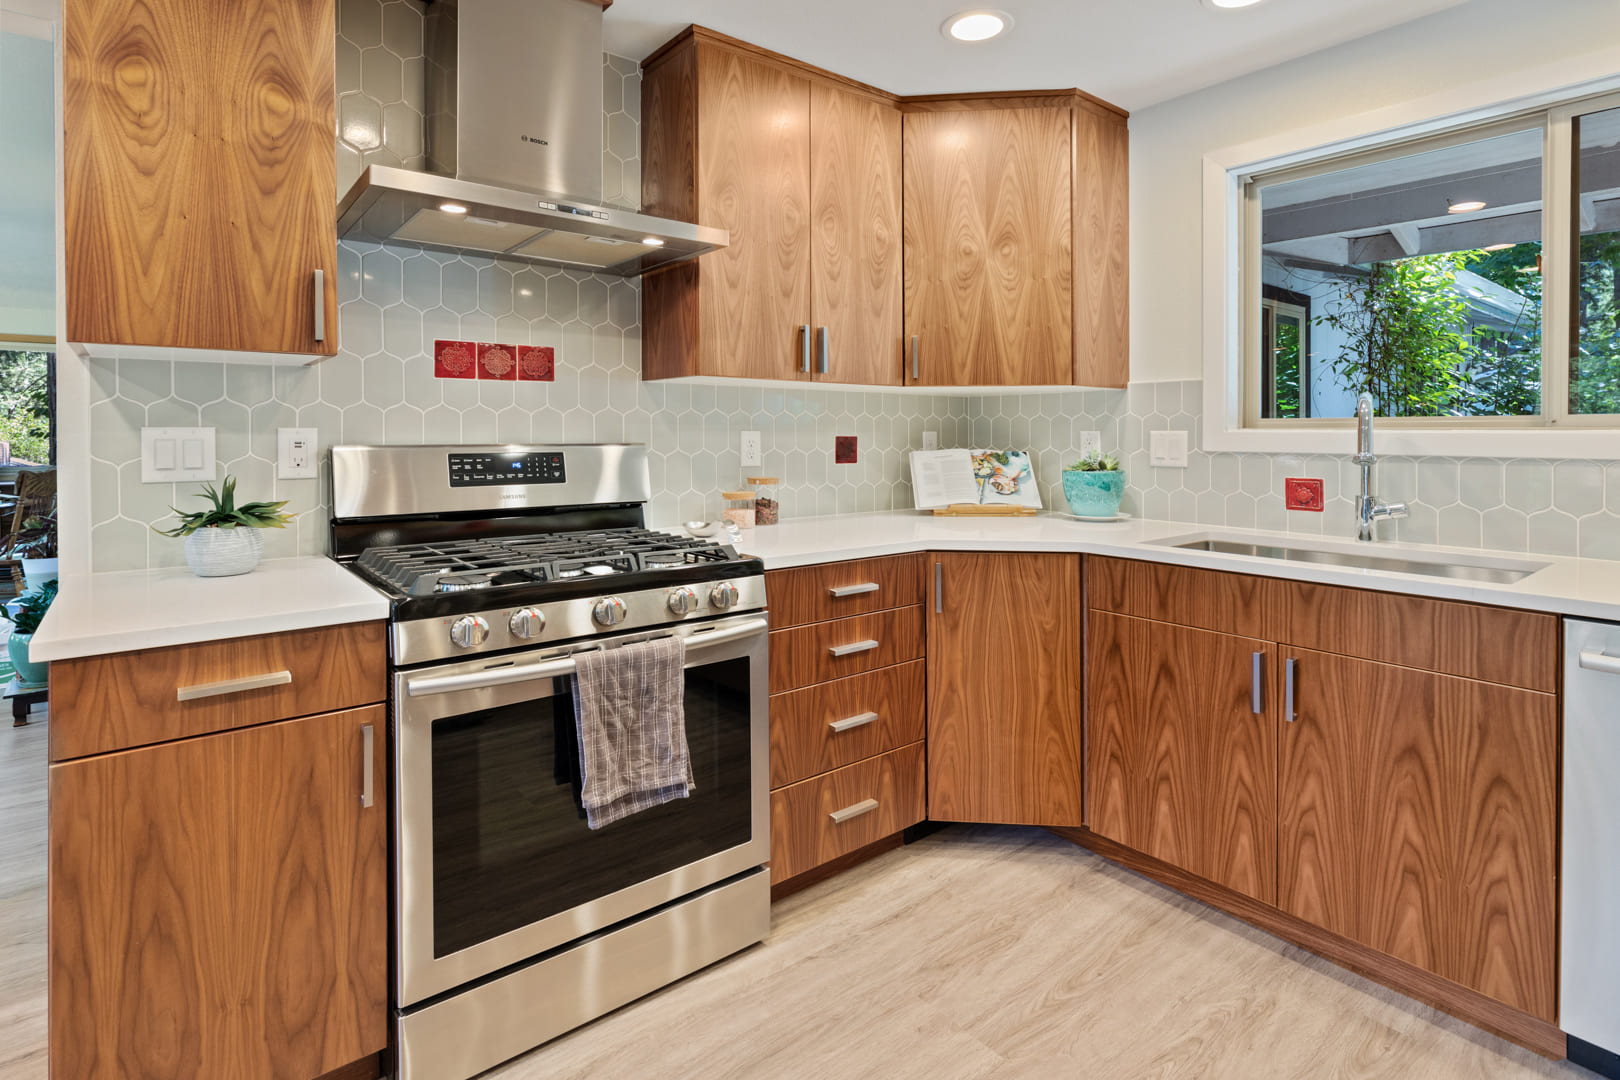 kitchen remodel with wood cabinets and hardwood floors in corvallis oregon by corvallis custom kitchens and baths 